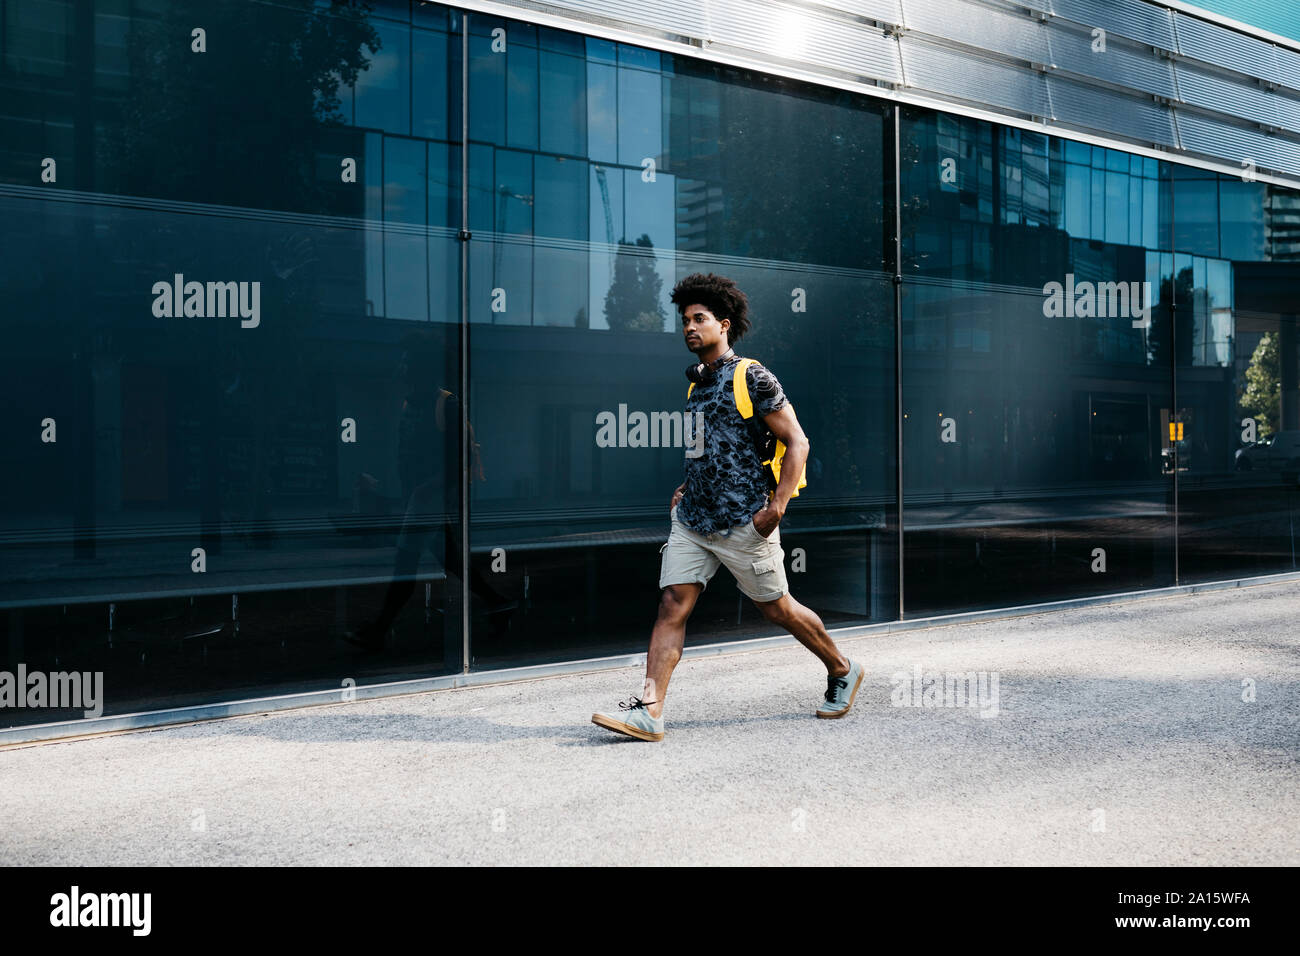 Man with yellow backpack and headphones walking down the street, Barcelona, Spain Stock Photo